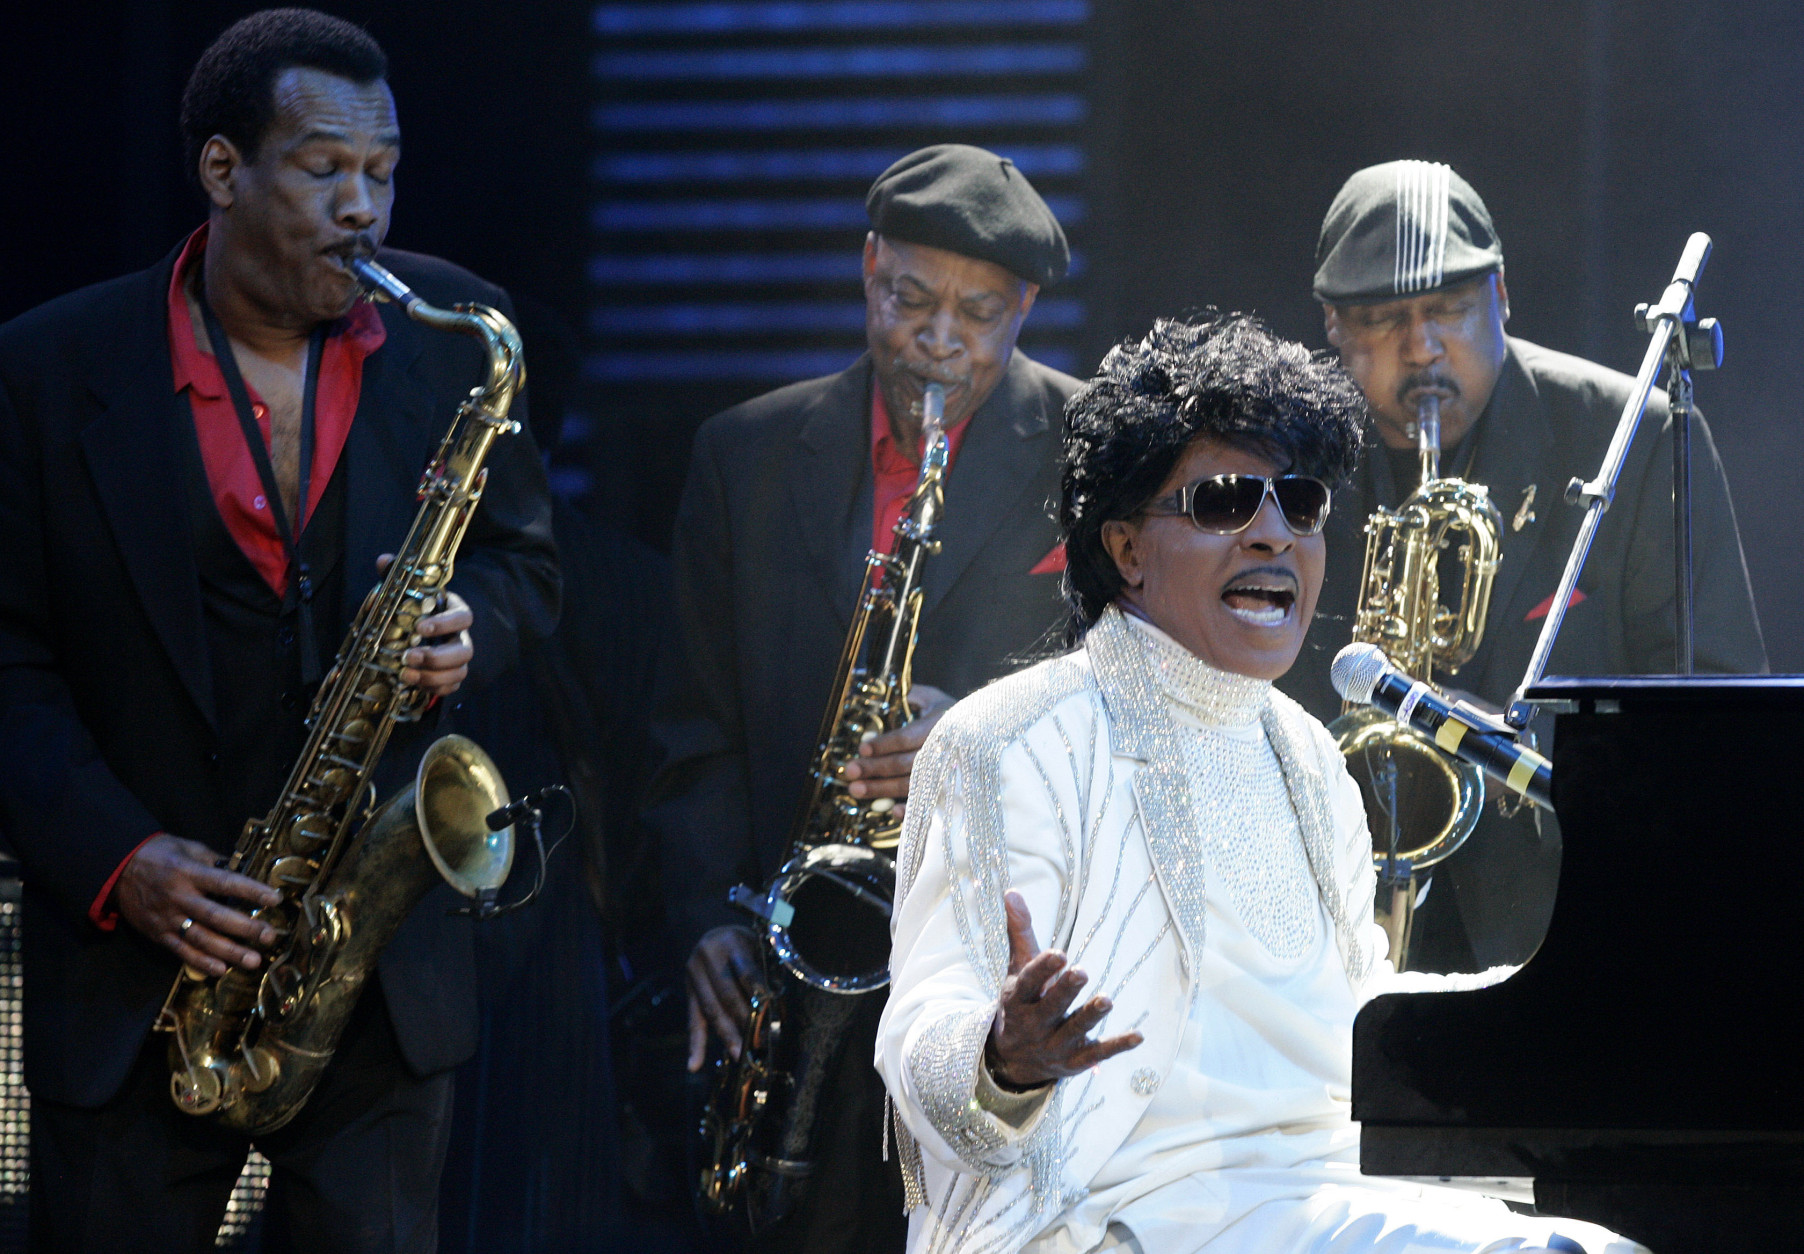 FILE - In this May 30, 2009 file photo, Little Richard performs at The Domino Effect, a tribute concert to New Orleans rock and roll musician Fats Domino, at the New Orleans Arena in New Orleans. Little Richard, the self-proclaimed architect of rock 'n' roll was involved in a car accident in Tenn., but police said there were no injuries. According to a police report, the 81-year-old singer was a passenger in a Cadillac that was struck by another vehicle on Monday, Aug. 25, 2014, in Murfreesboro, Tenn., about 40 miles southeast of Nashville.  (AP Photo/Patrick Semansky, file)